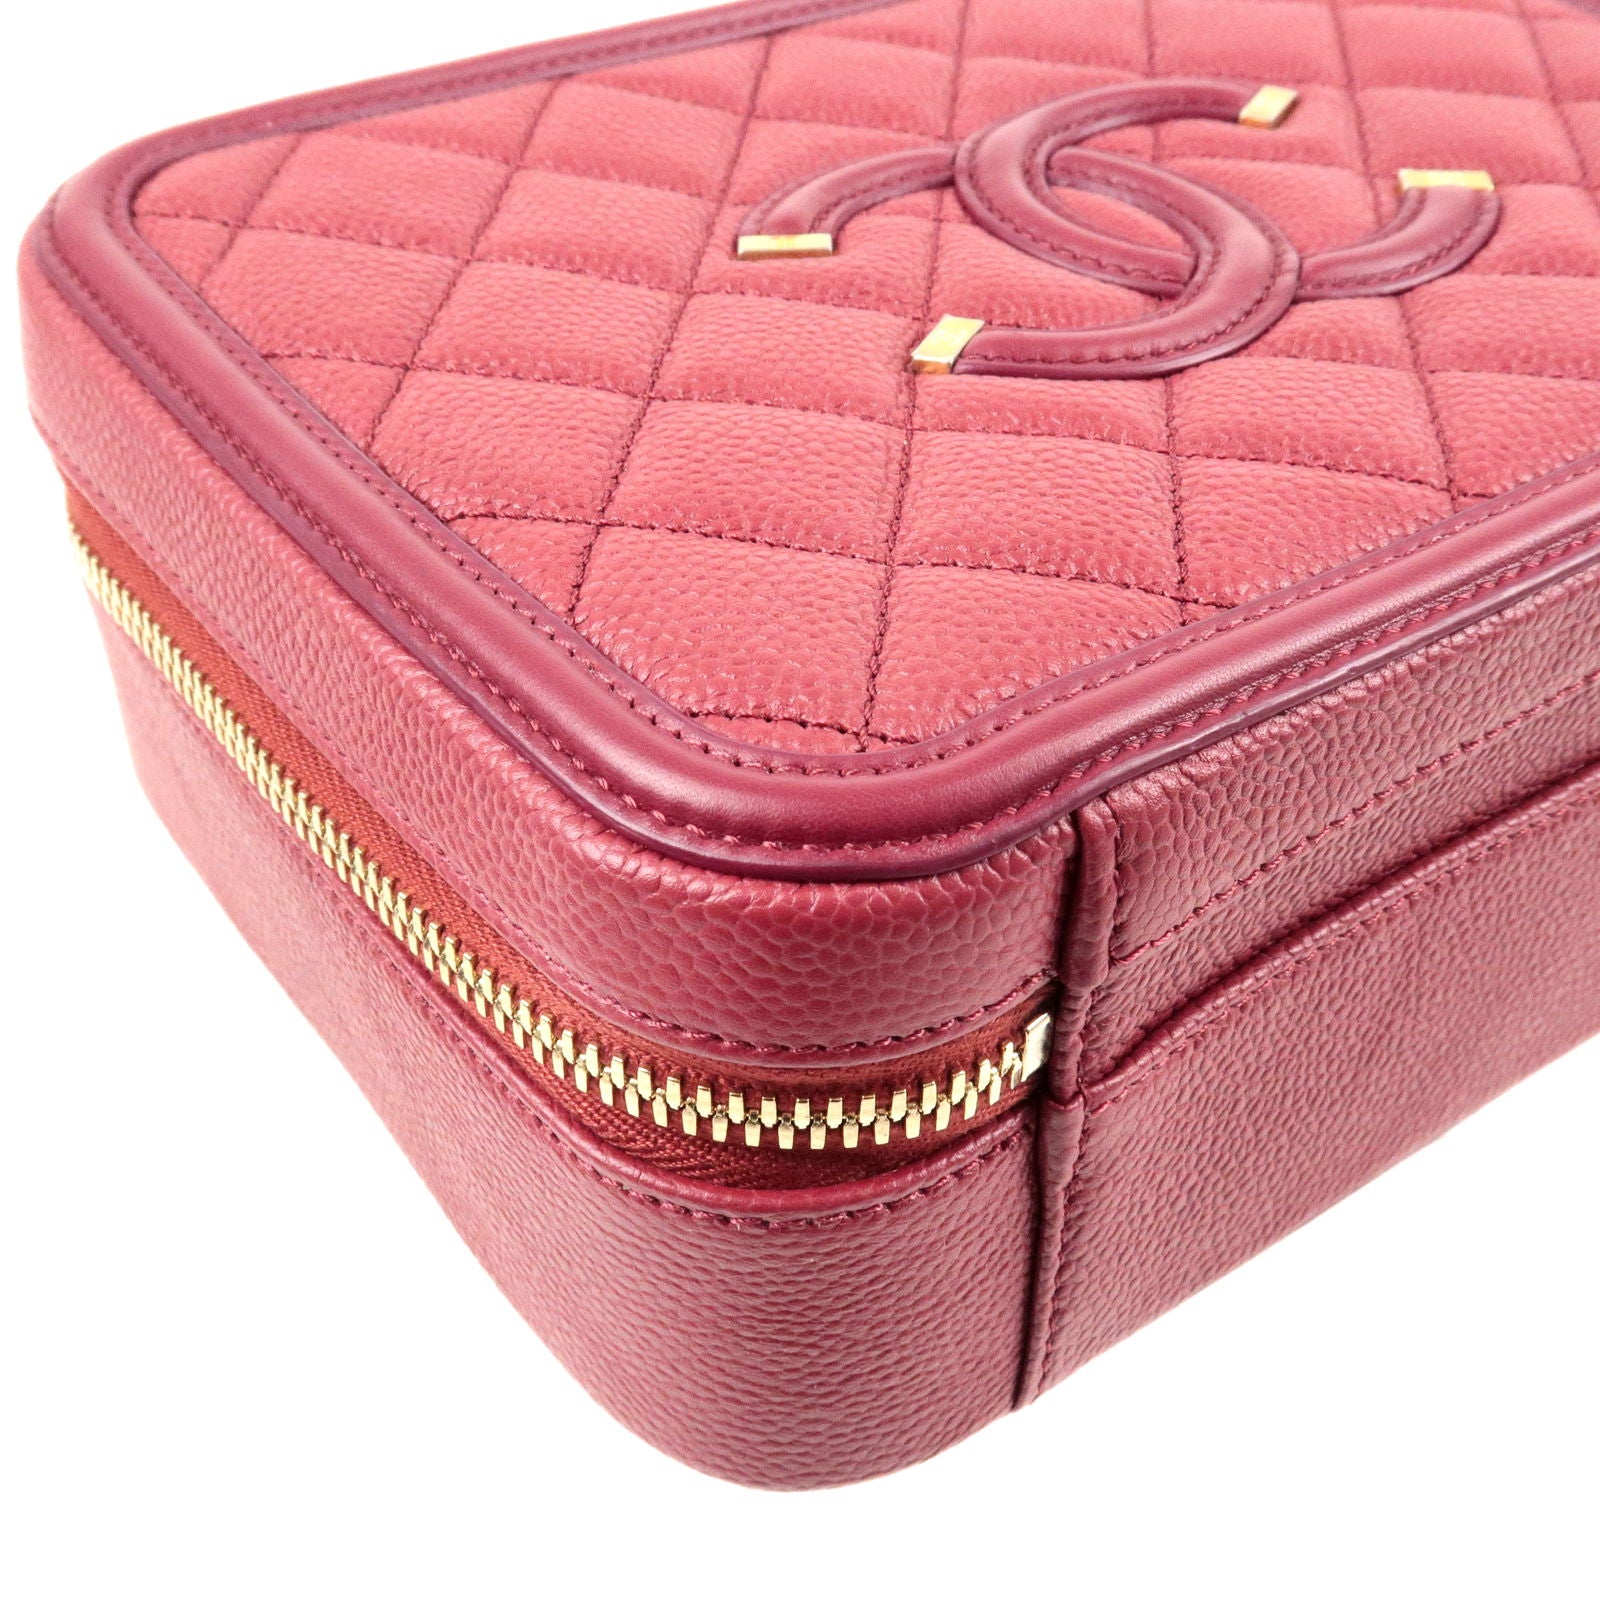 CHANEL-CC-Filigree-Caviar-Skin-Vanity-Case-Chain-Bag-Red-A93343 –  dct-ep_vintage luxury Store